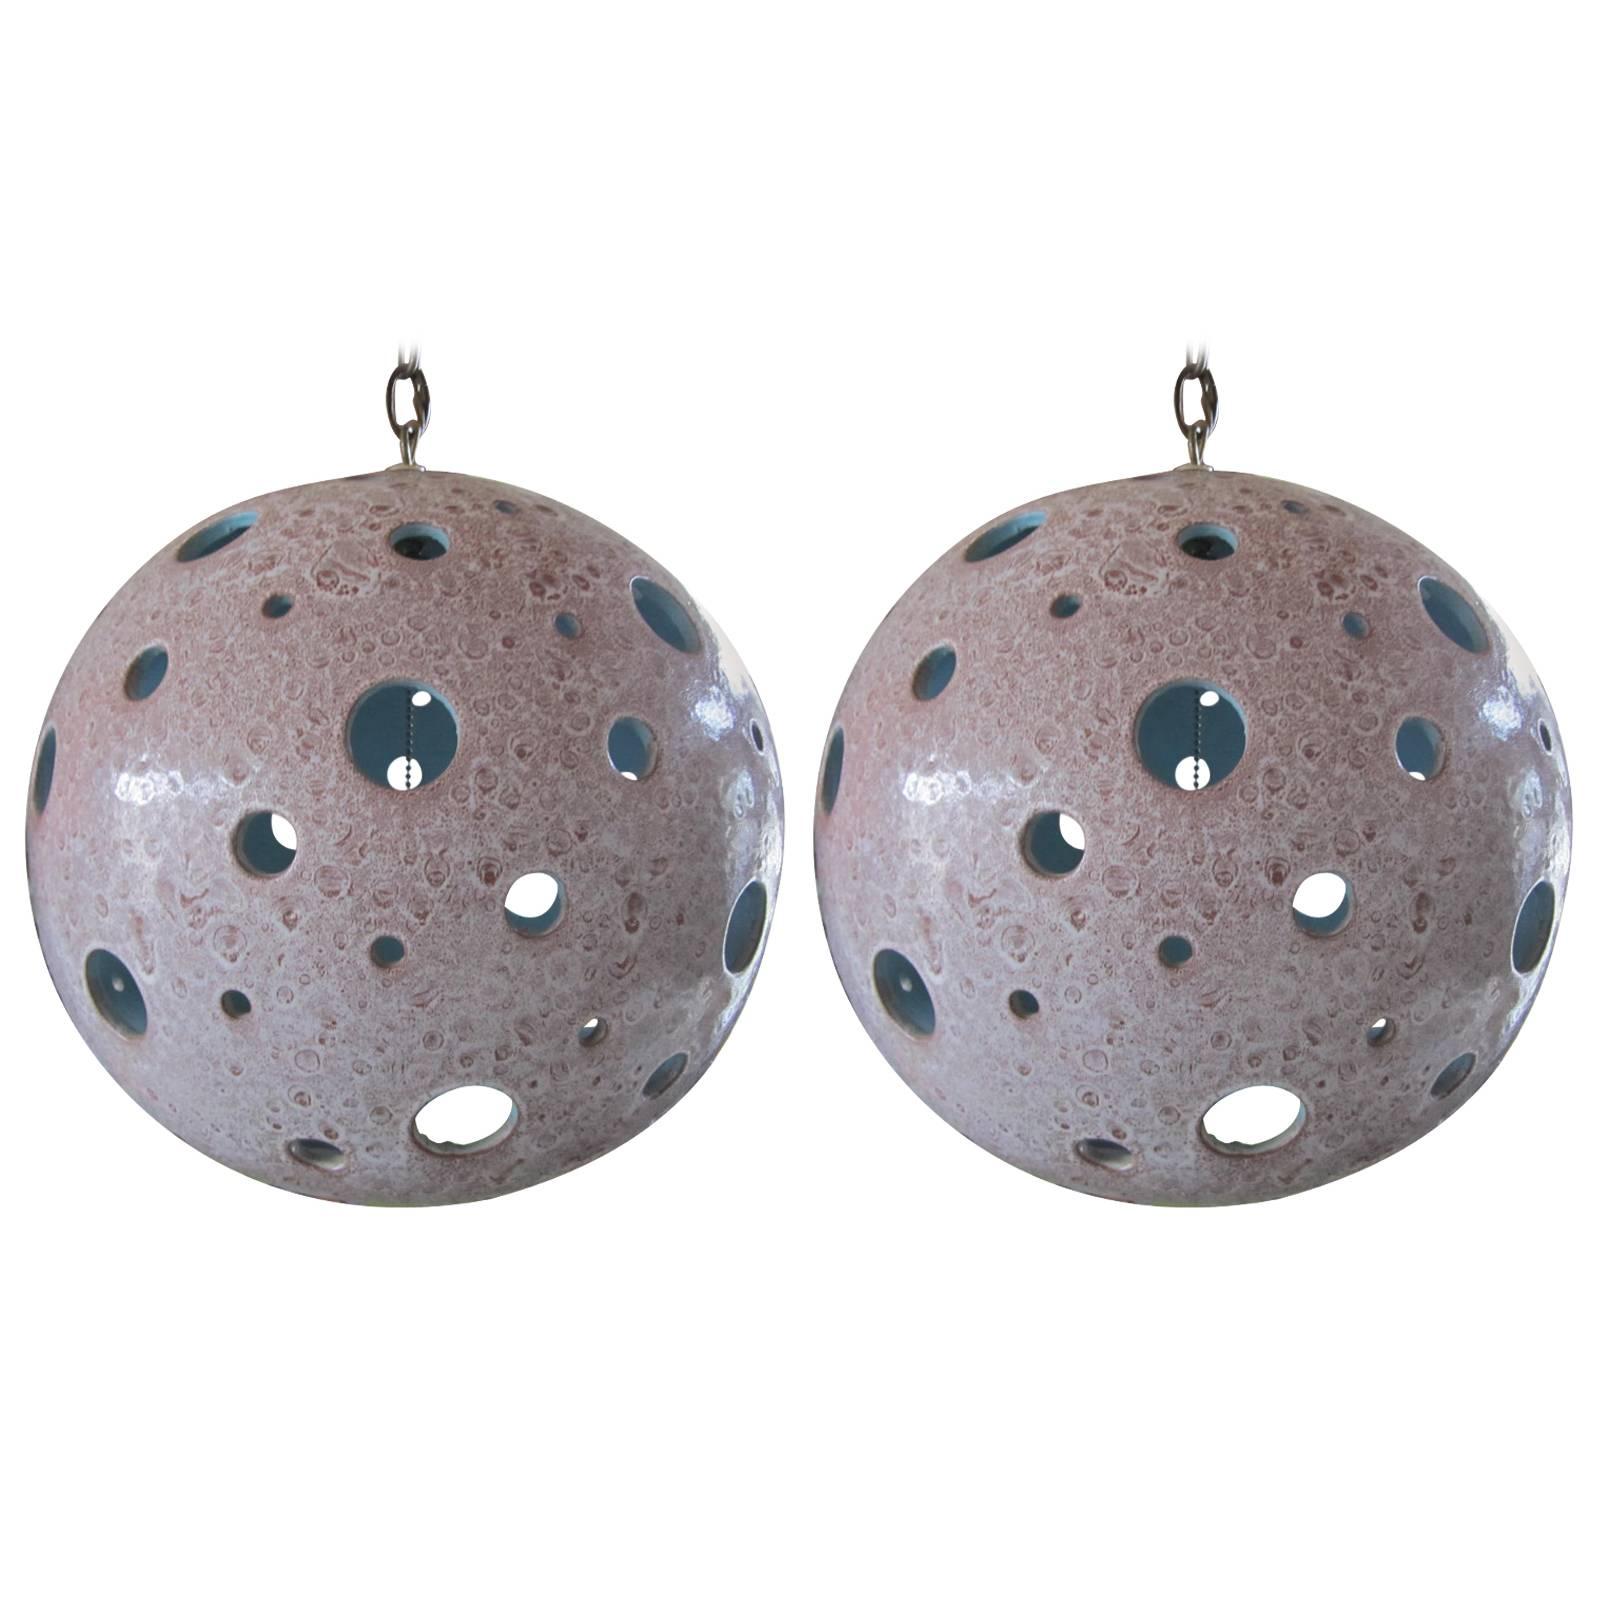 Pair of Large-Scale Ceramic Ball Globe Pendant Chandeliers For Sale